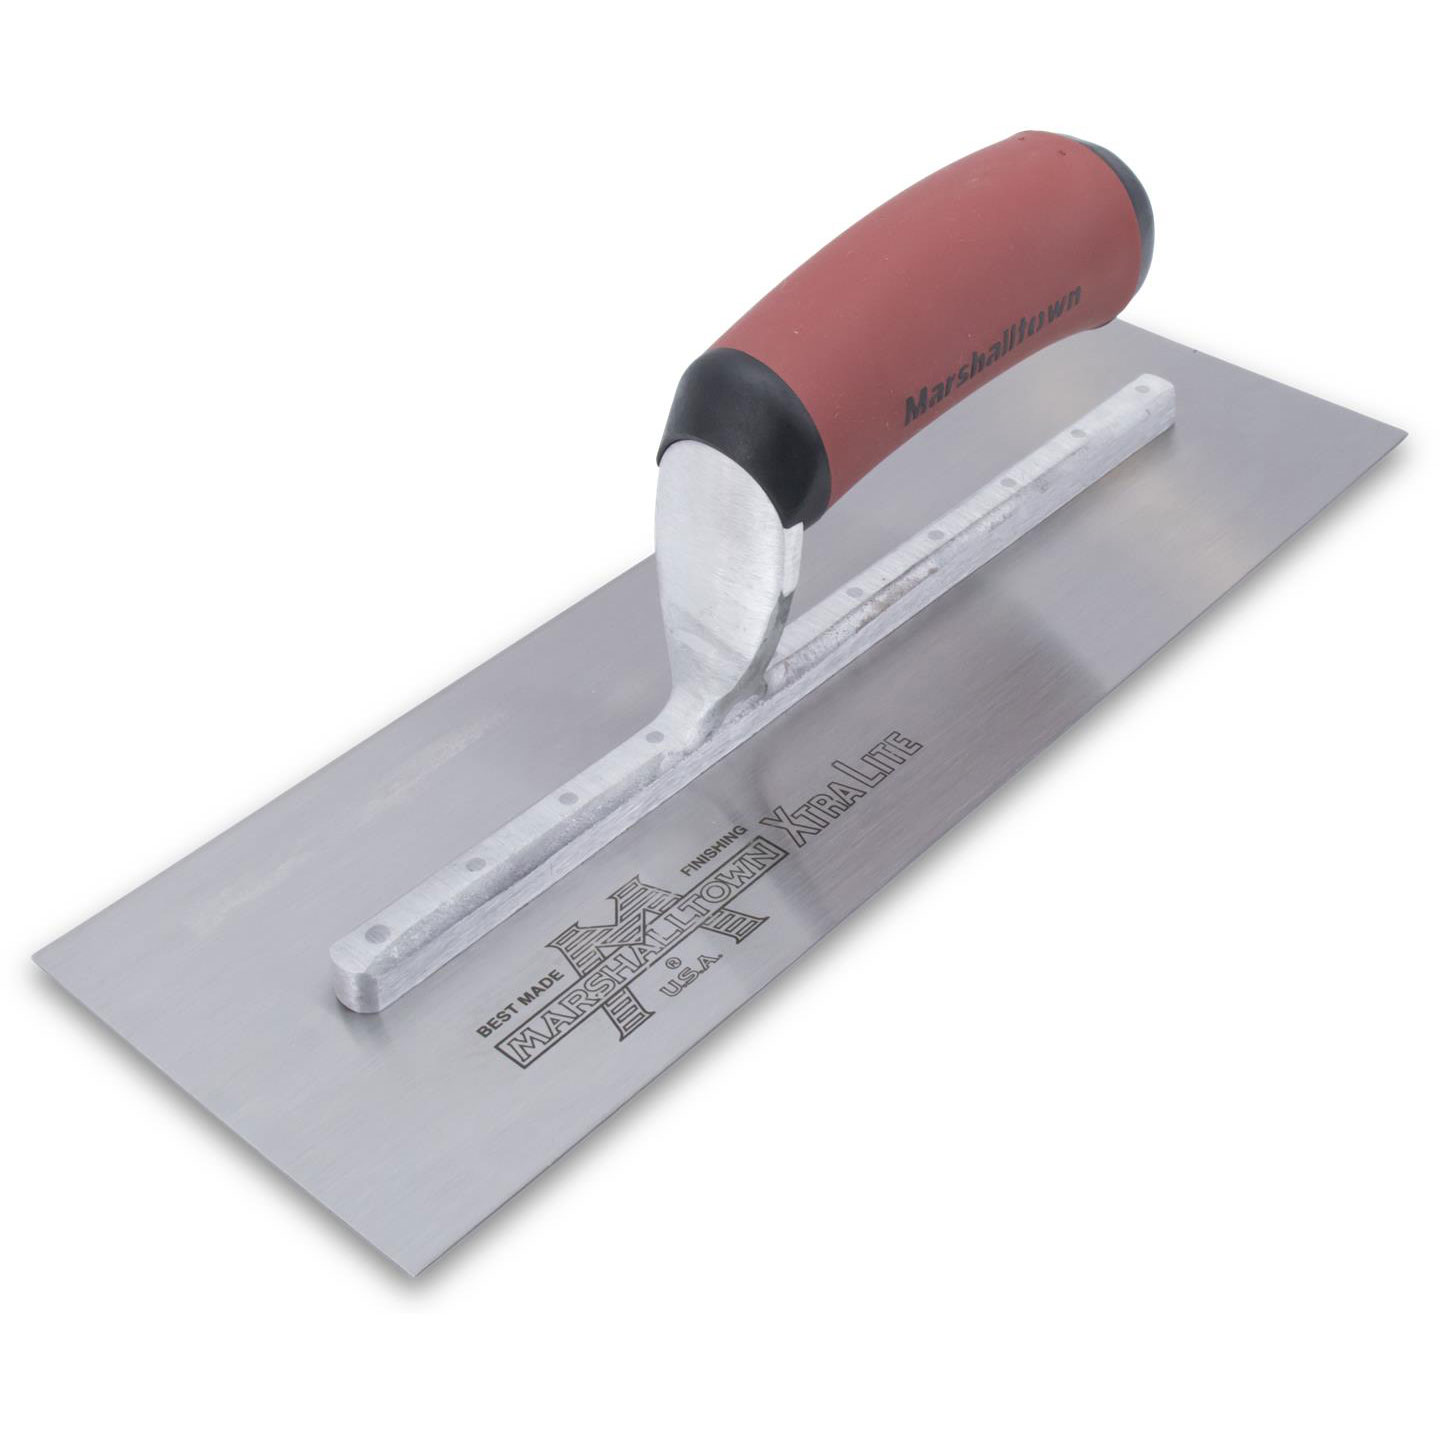 Marshalltown MXS65D 14in x 4-1/2in Finishing Trowel with Curved DuraSoft Handle MXS65D